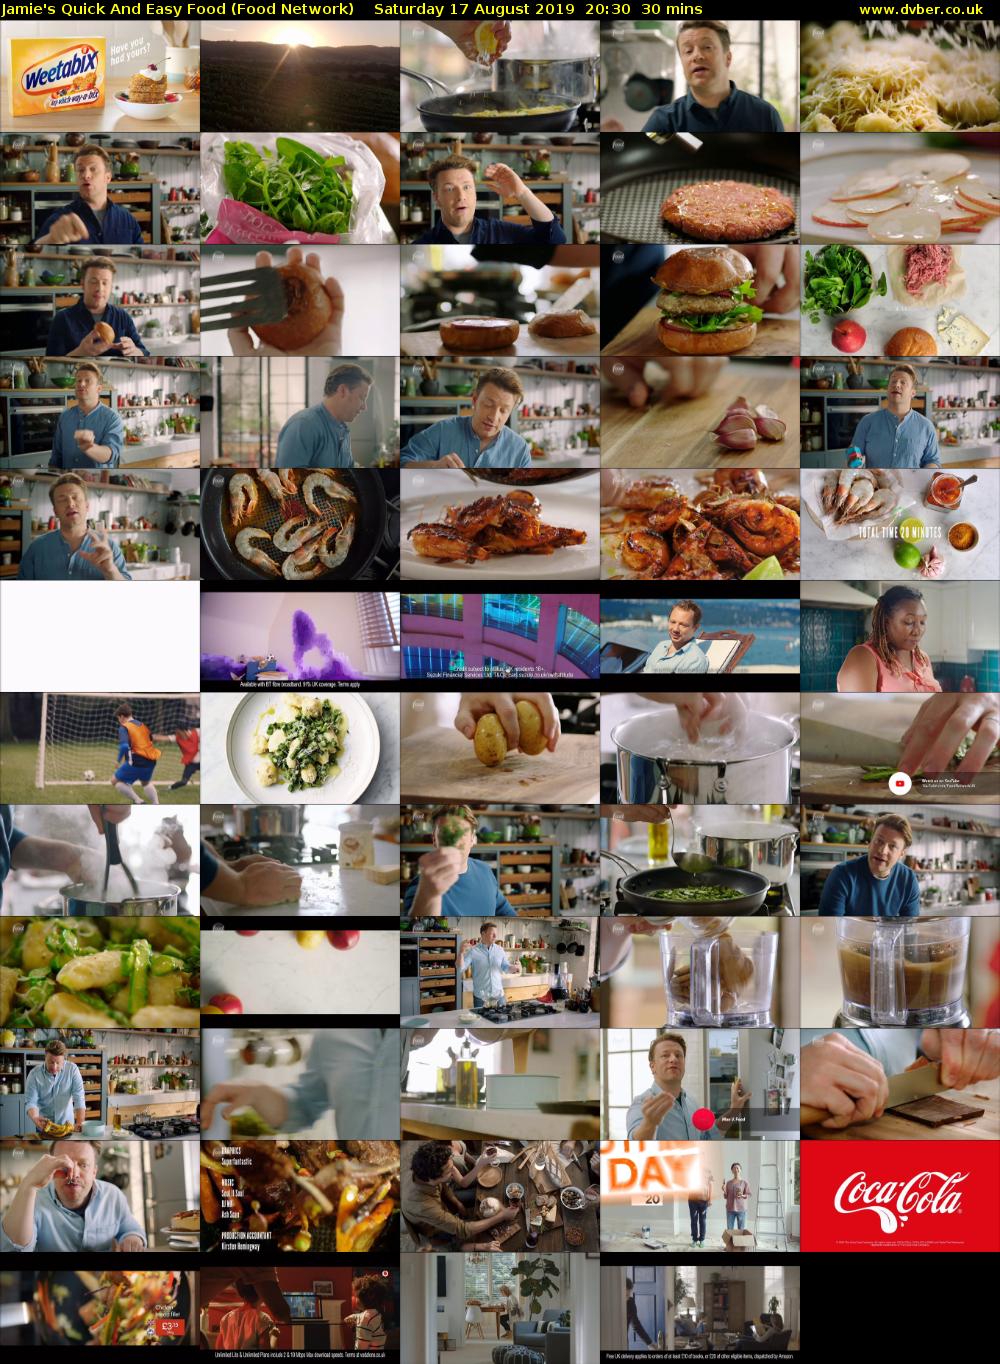 Jamie's Quick And Easy Food (Food Network) Saturday 17 August 2019 20:30 - 21:00